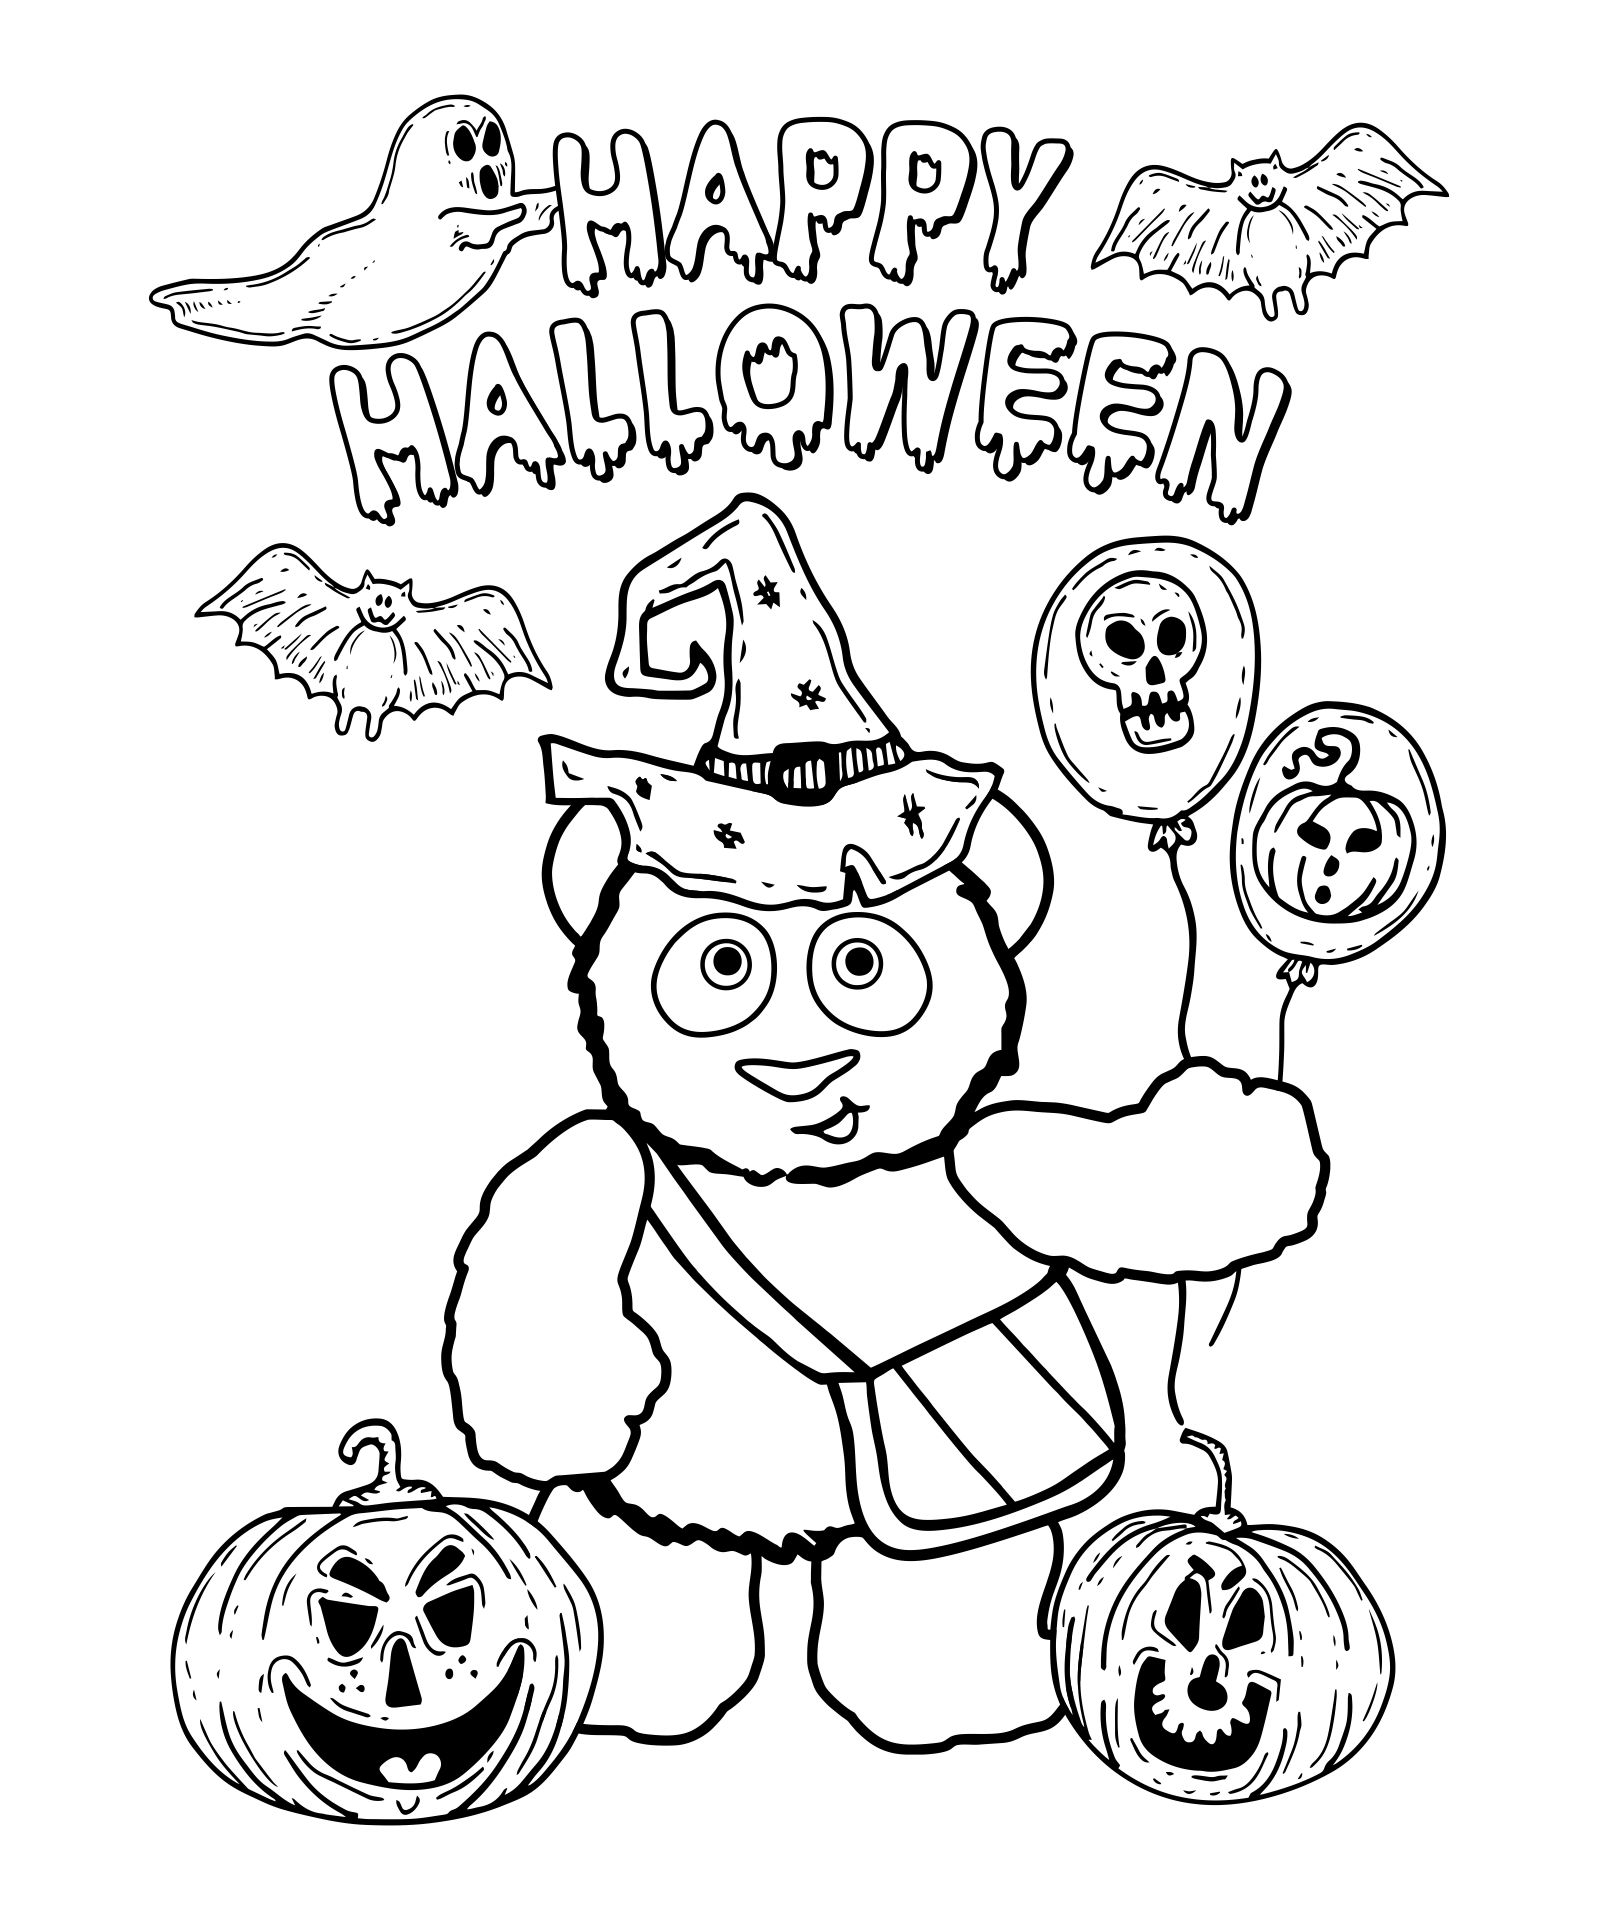 Printable Halloween Coloring Pages For Kids With Little Pim